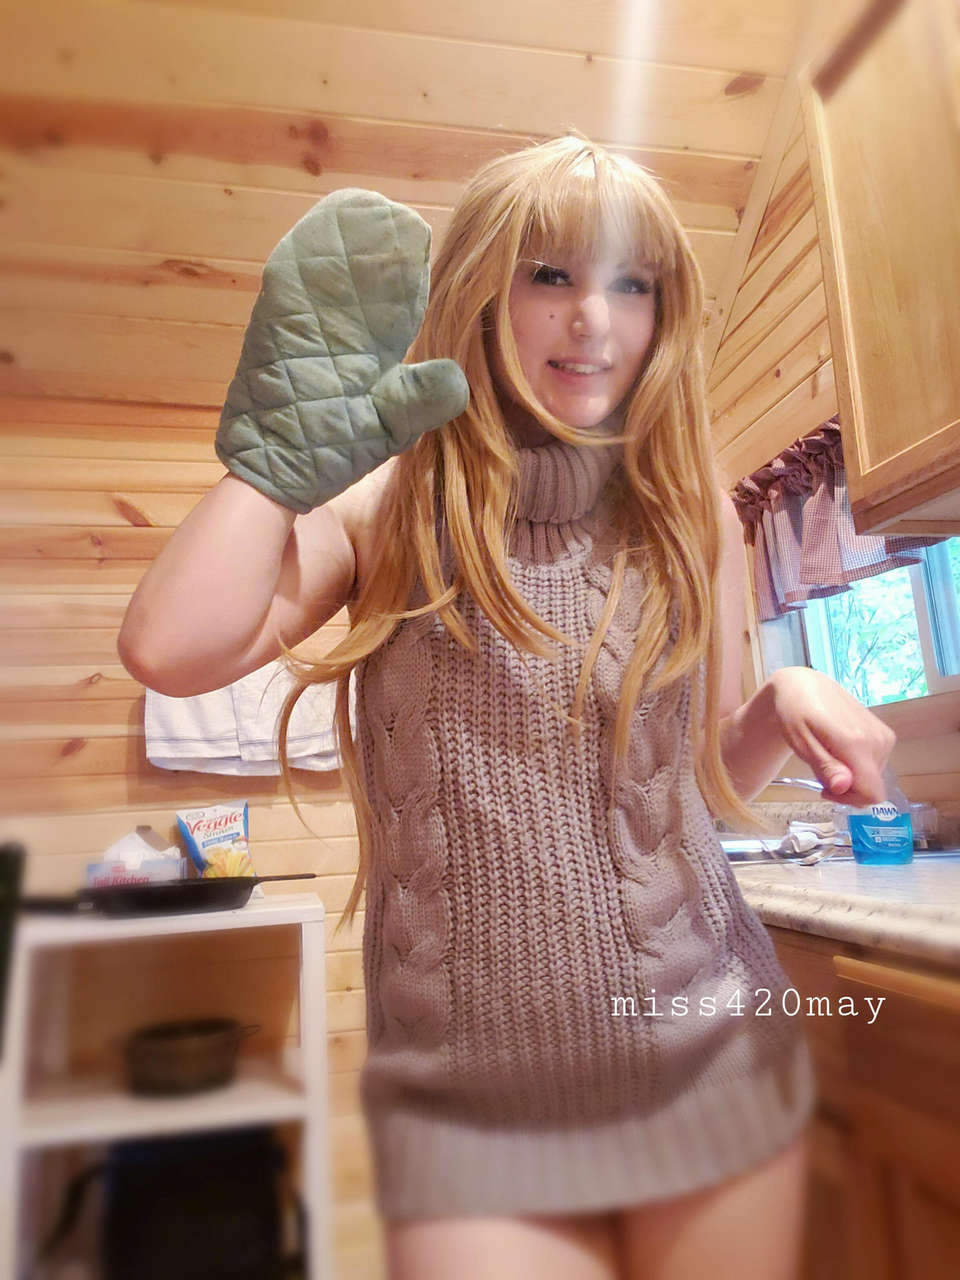 F Rawr Tell Asuna What You Want For Dinner Link In Comment